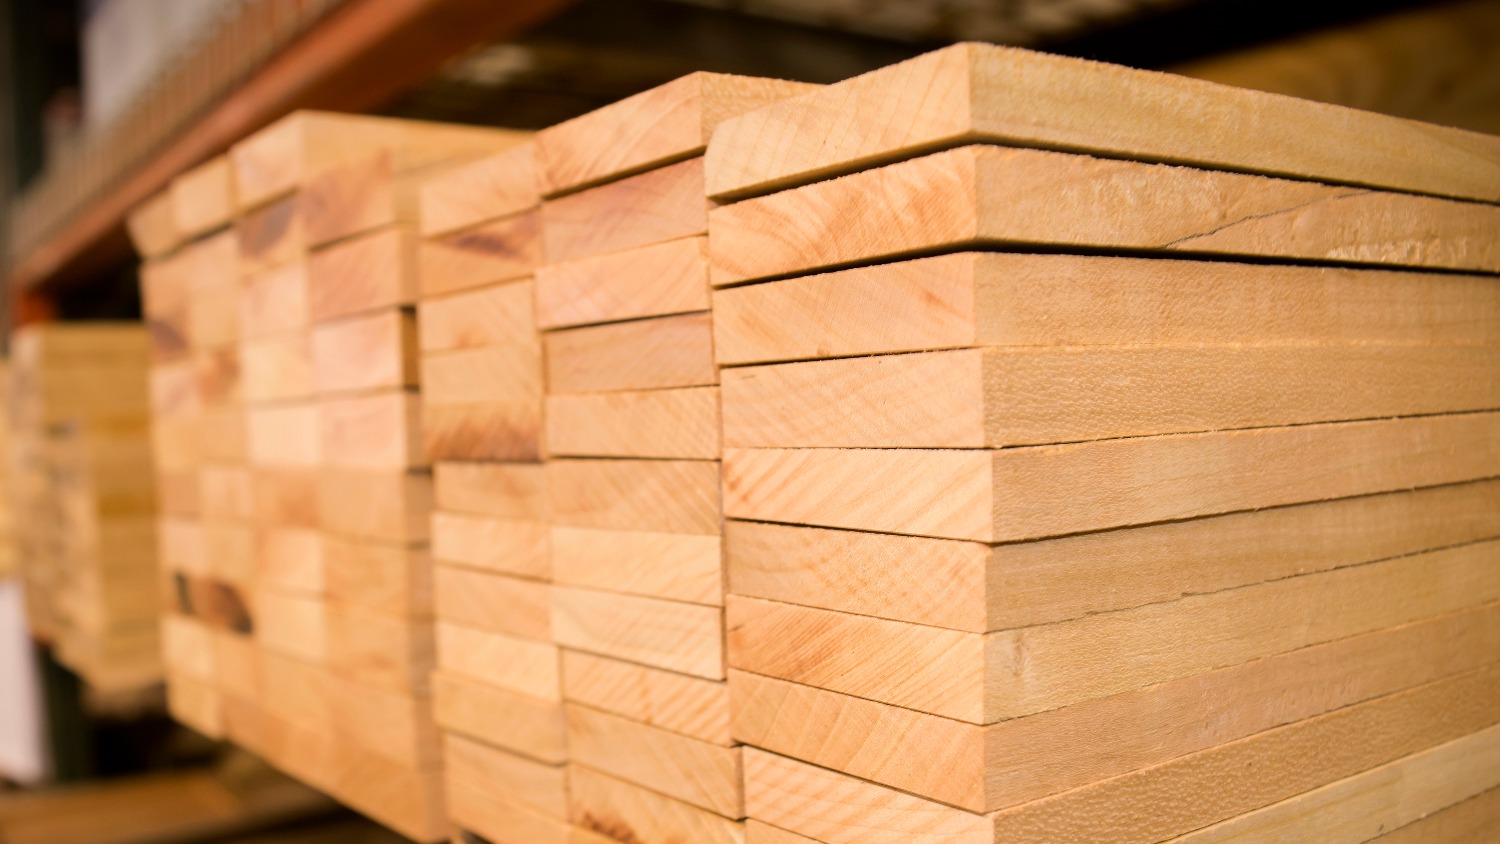 Lumber Shortage - Stack - Ask an Expert: Why Is There a Lumber Shortage - Forestry and Environmental Resources Department at NC State